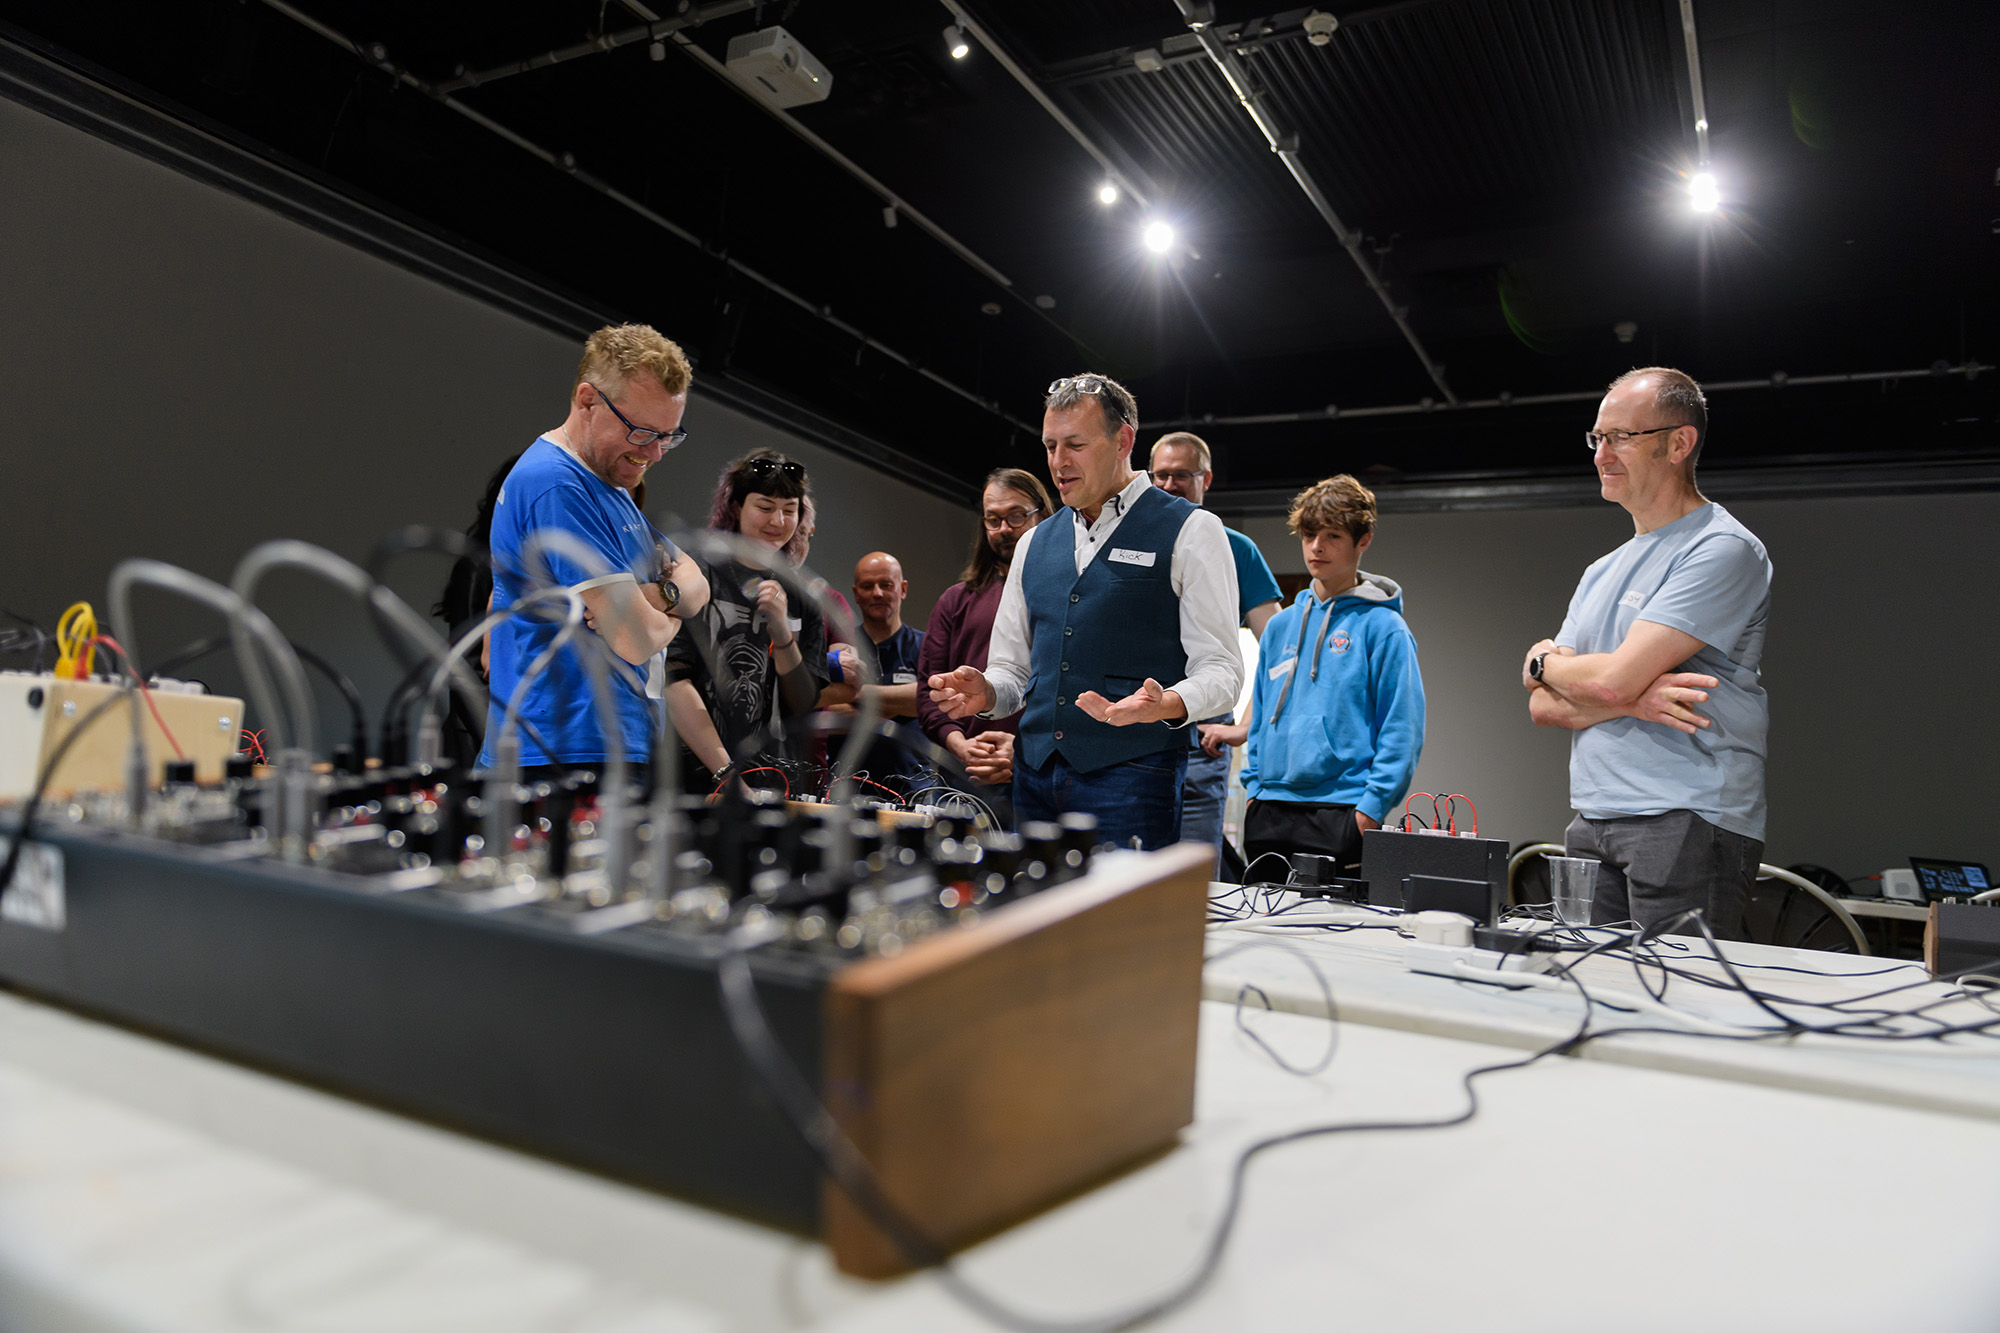 Rick Holt from Frequency Central leading a modular synth workshop at the Herbert in 2022. There is a group of people gathered around him and a synth on a table in the foreground in front of them.